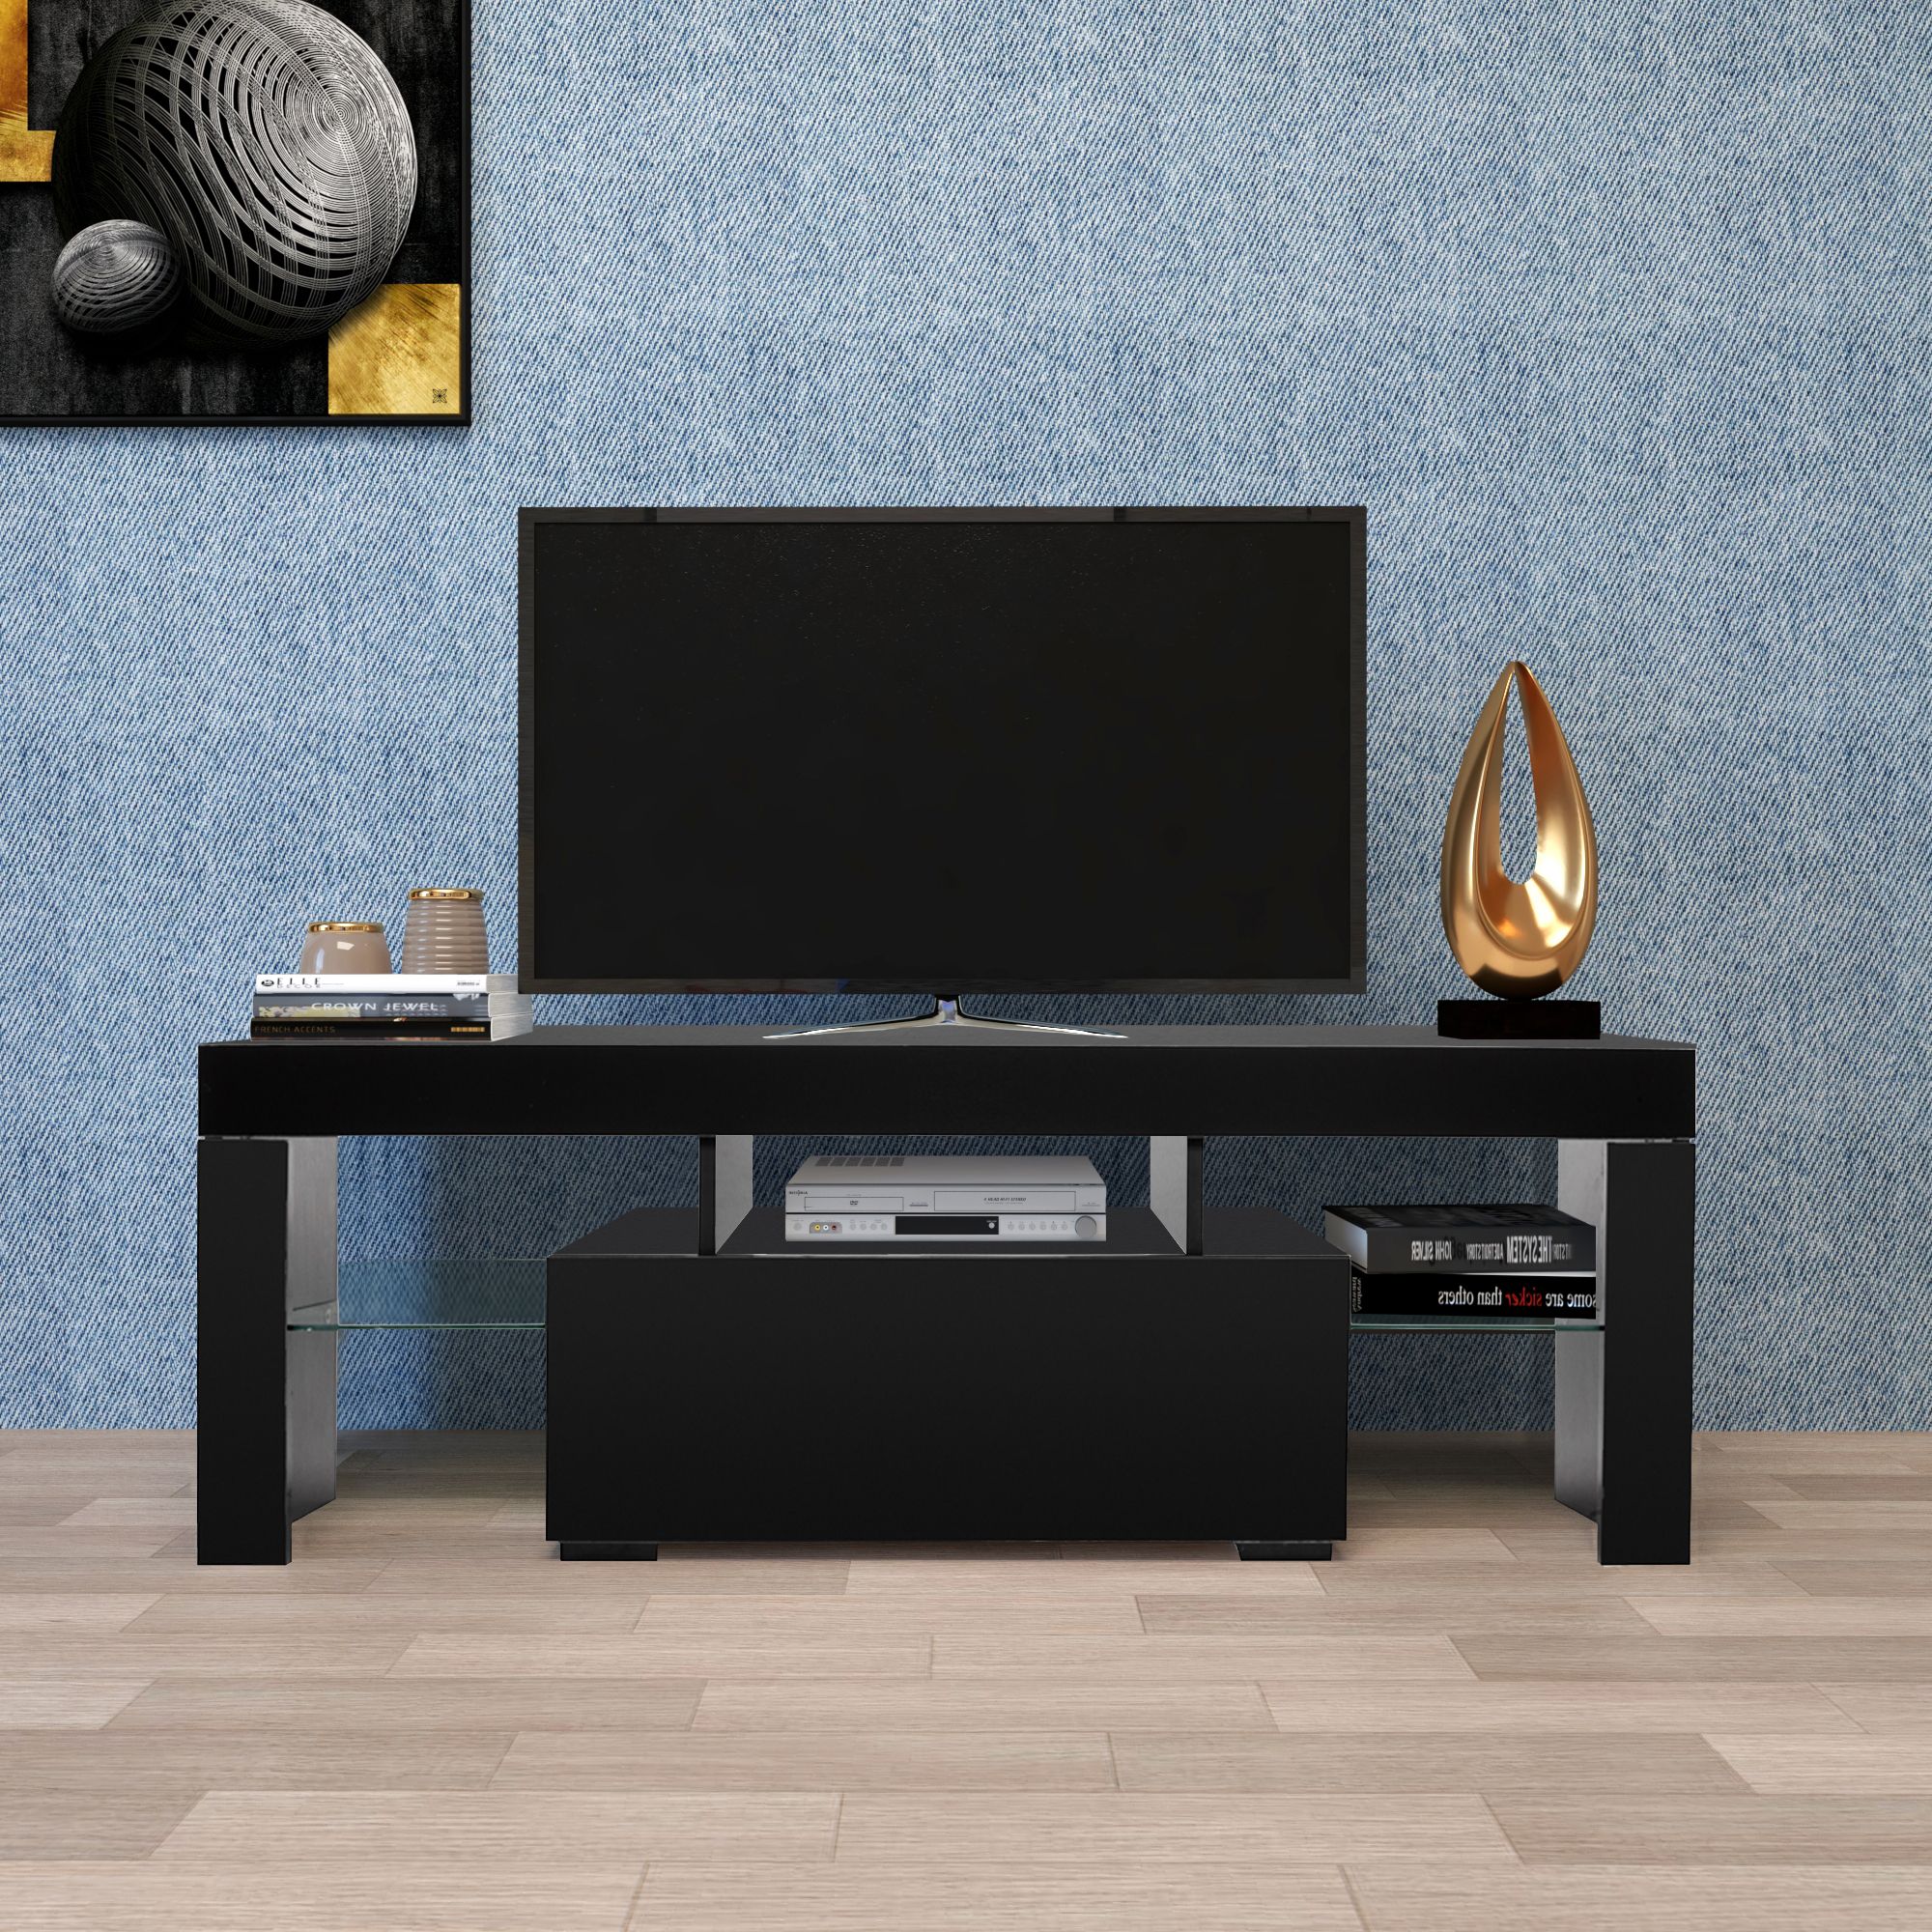 Entertainment Centers And Tv Stands, Yofe Tv Stand With For Led Tv Cabinets (View 3 of 15)